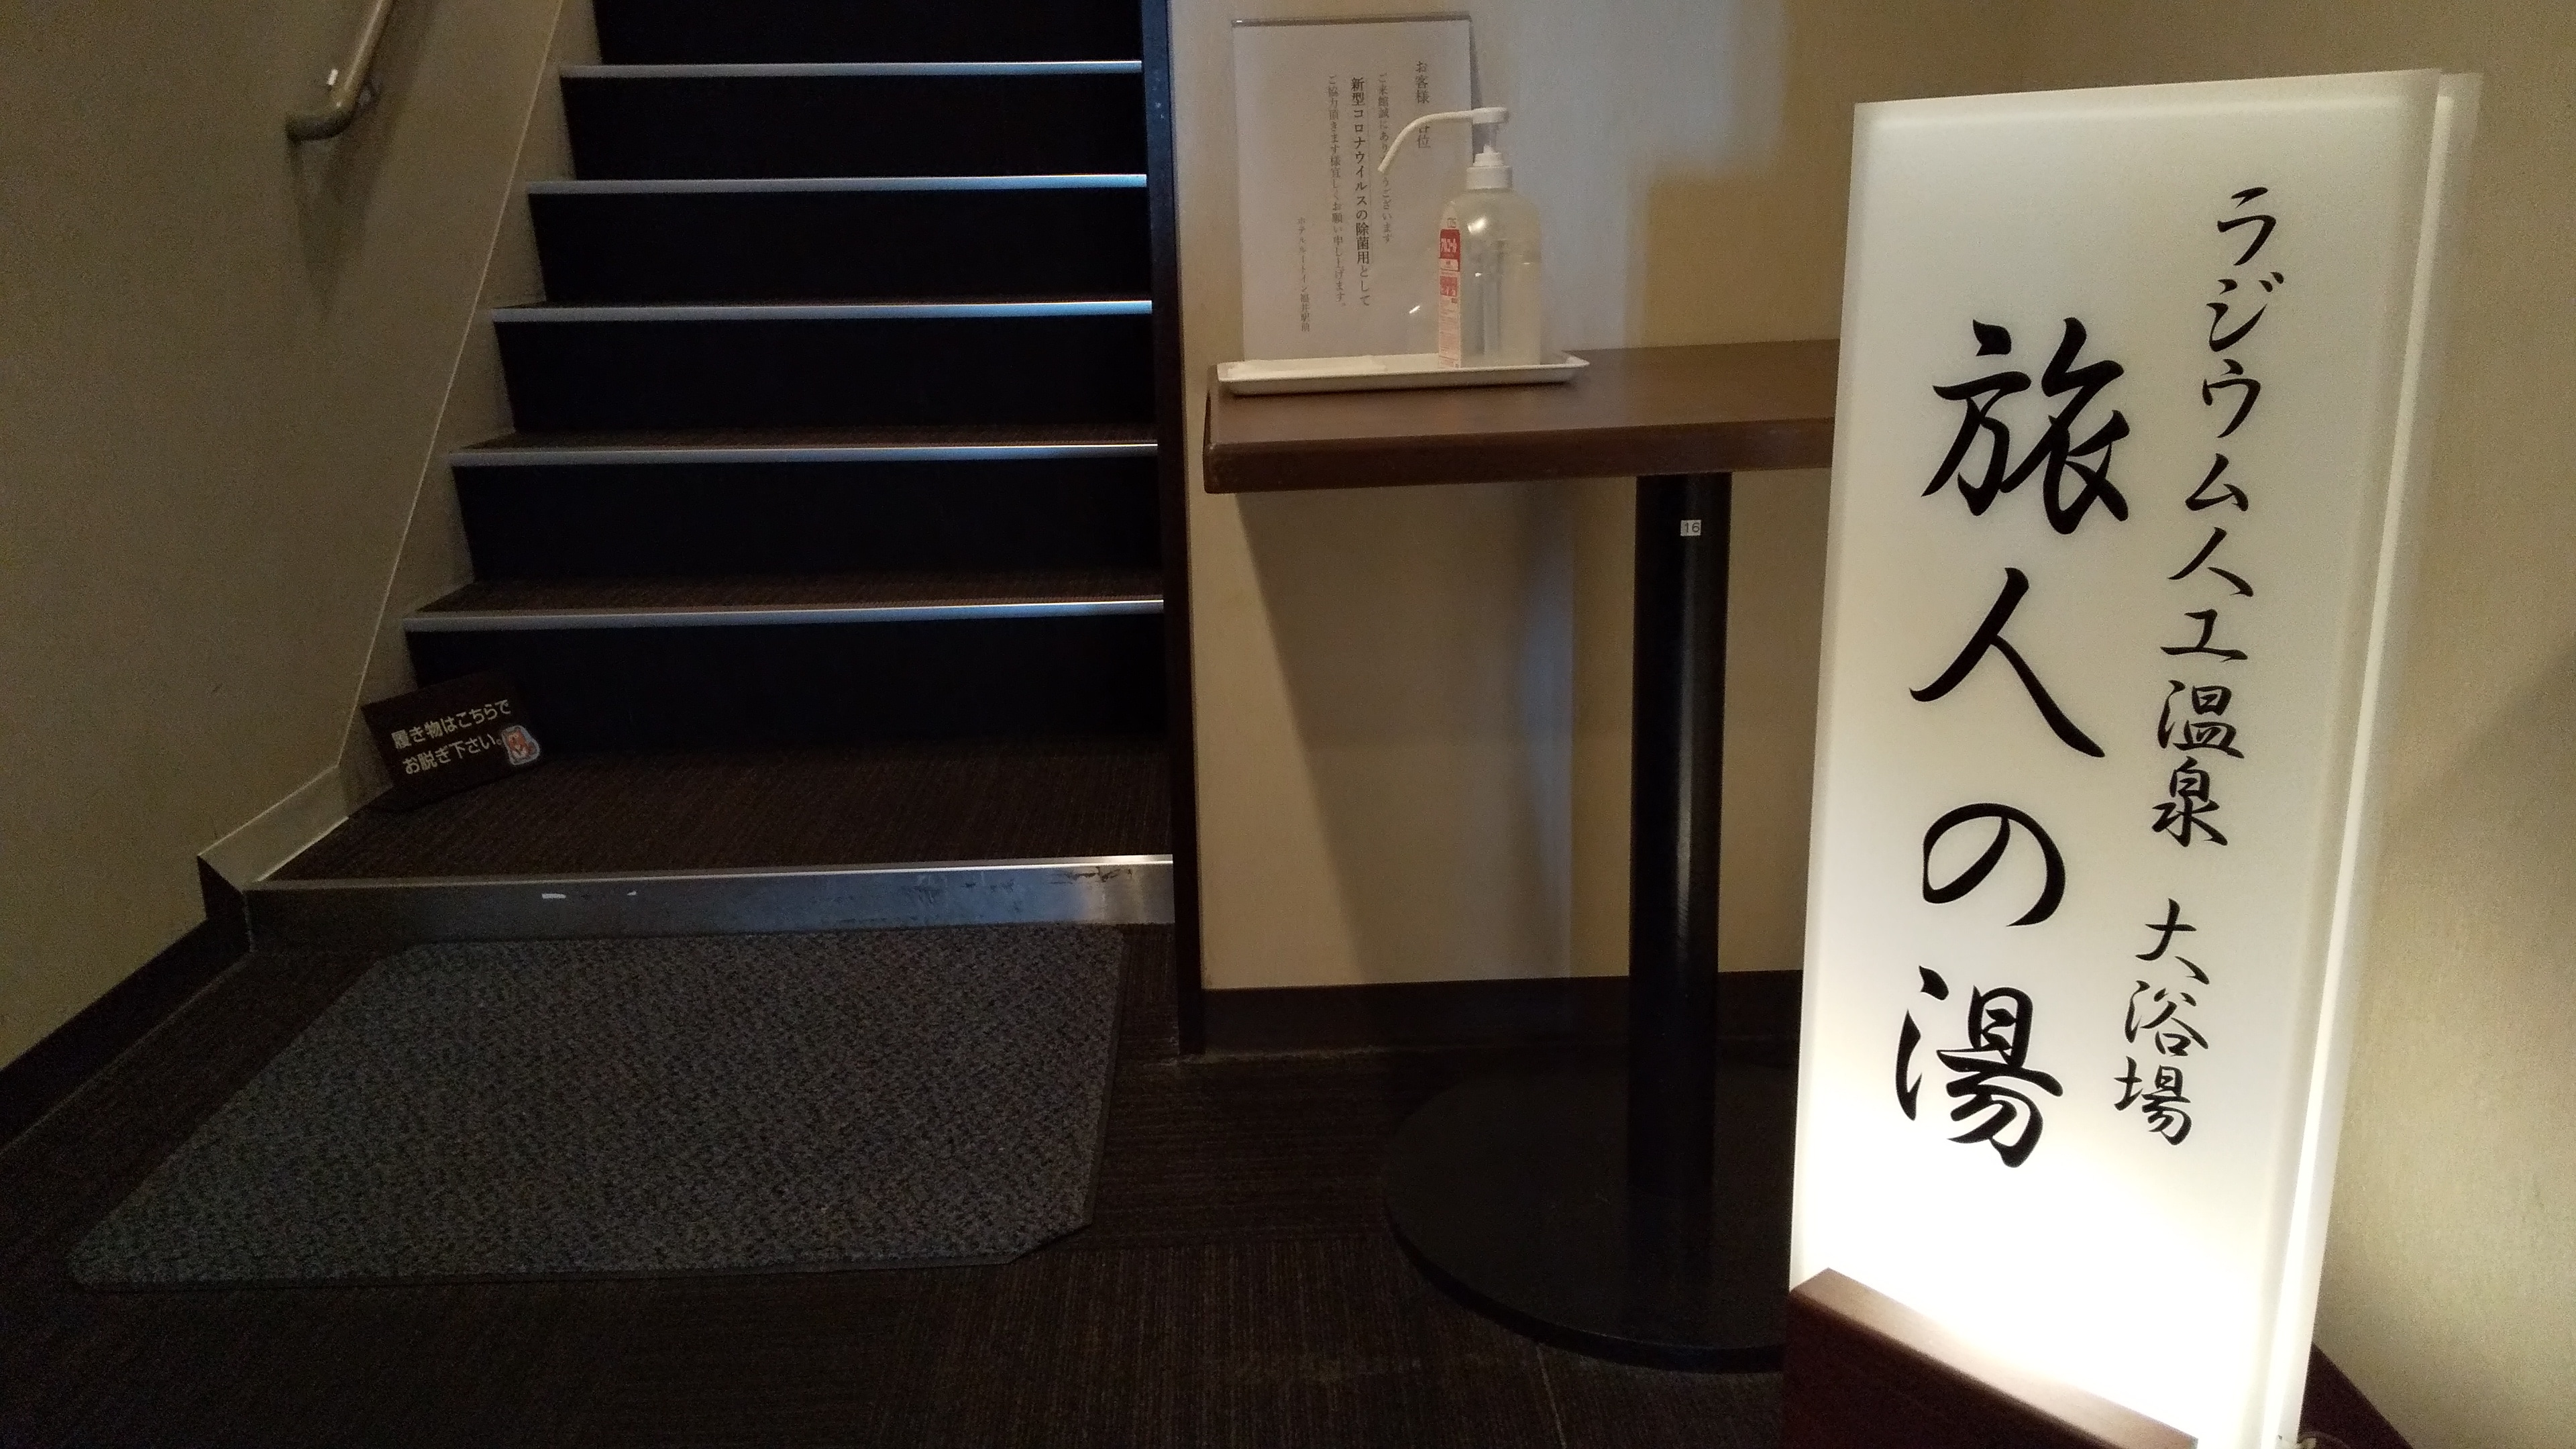 Separate baths for men and women are available on the 14th floor of the top floor ☆ 15:00 to 26:00, 5:00 to 10:00 ☆